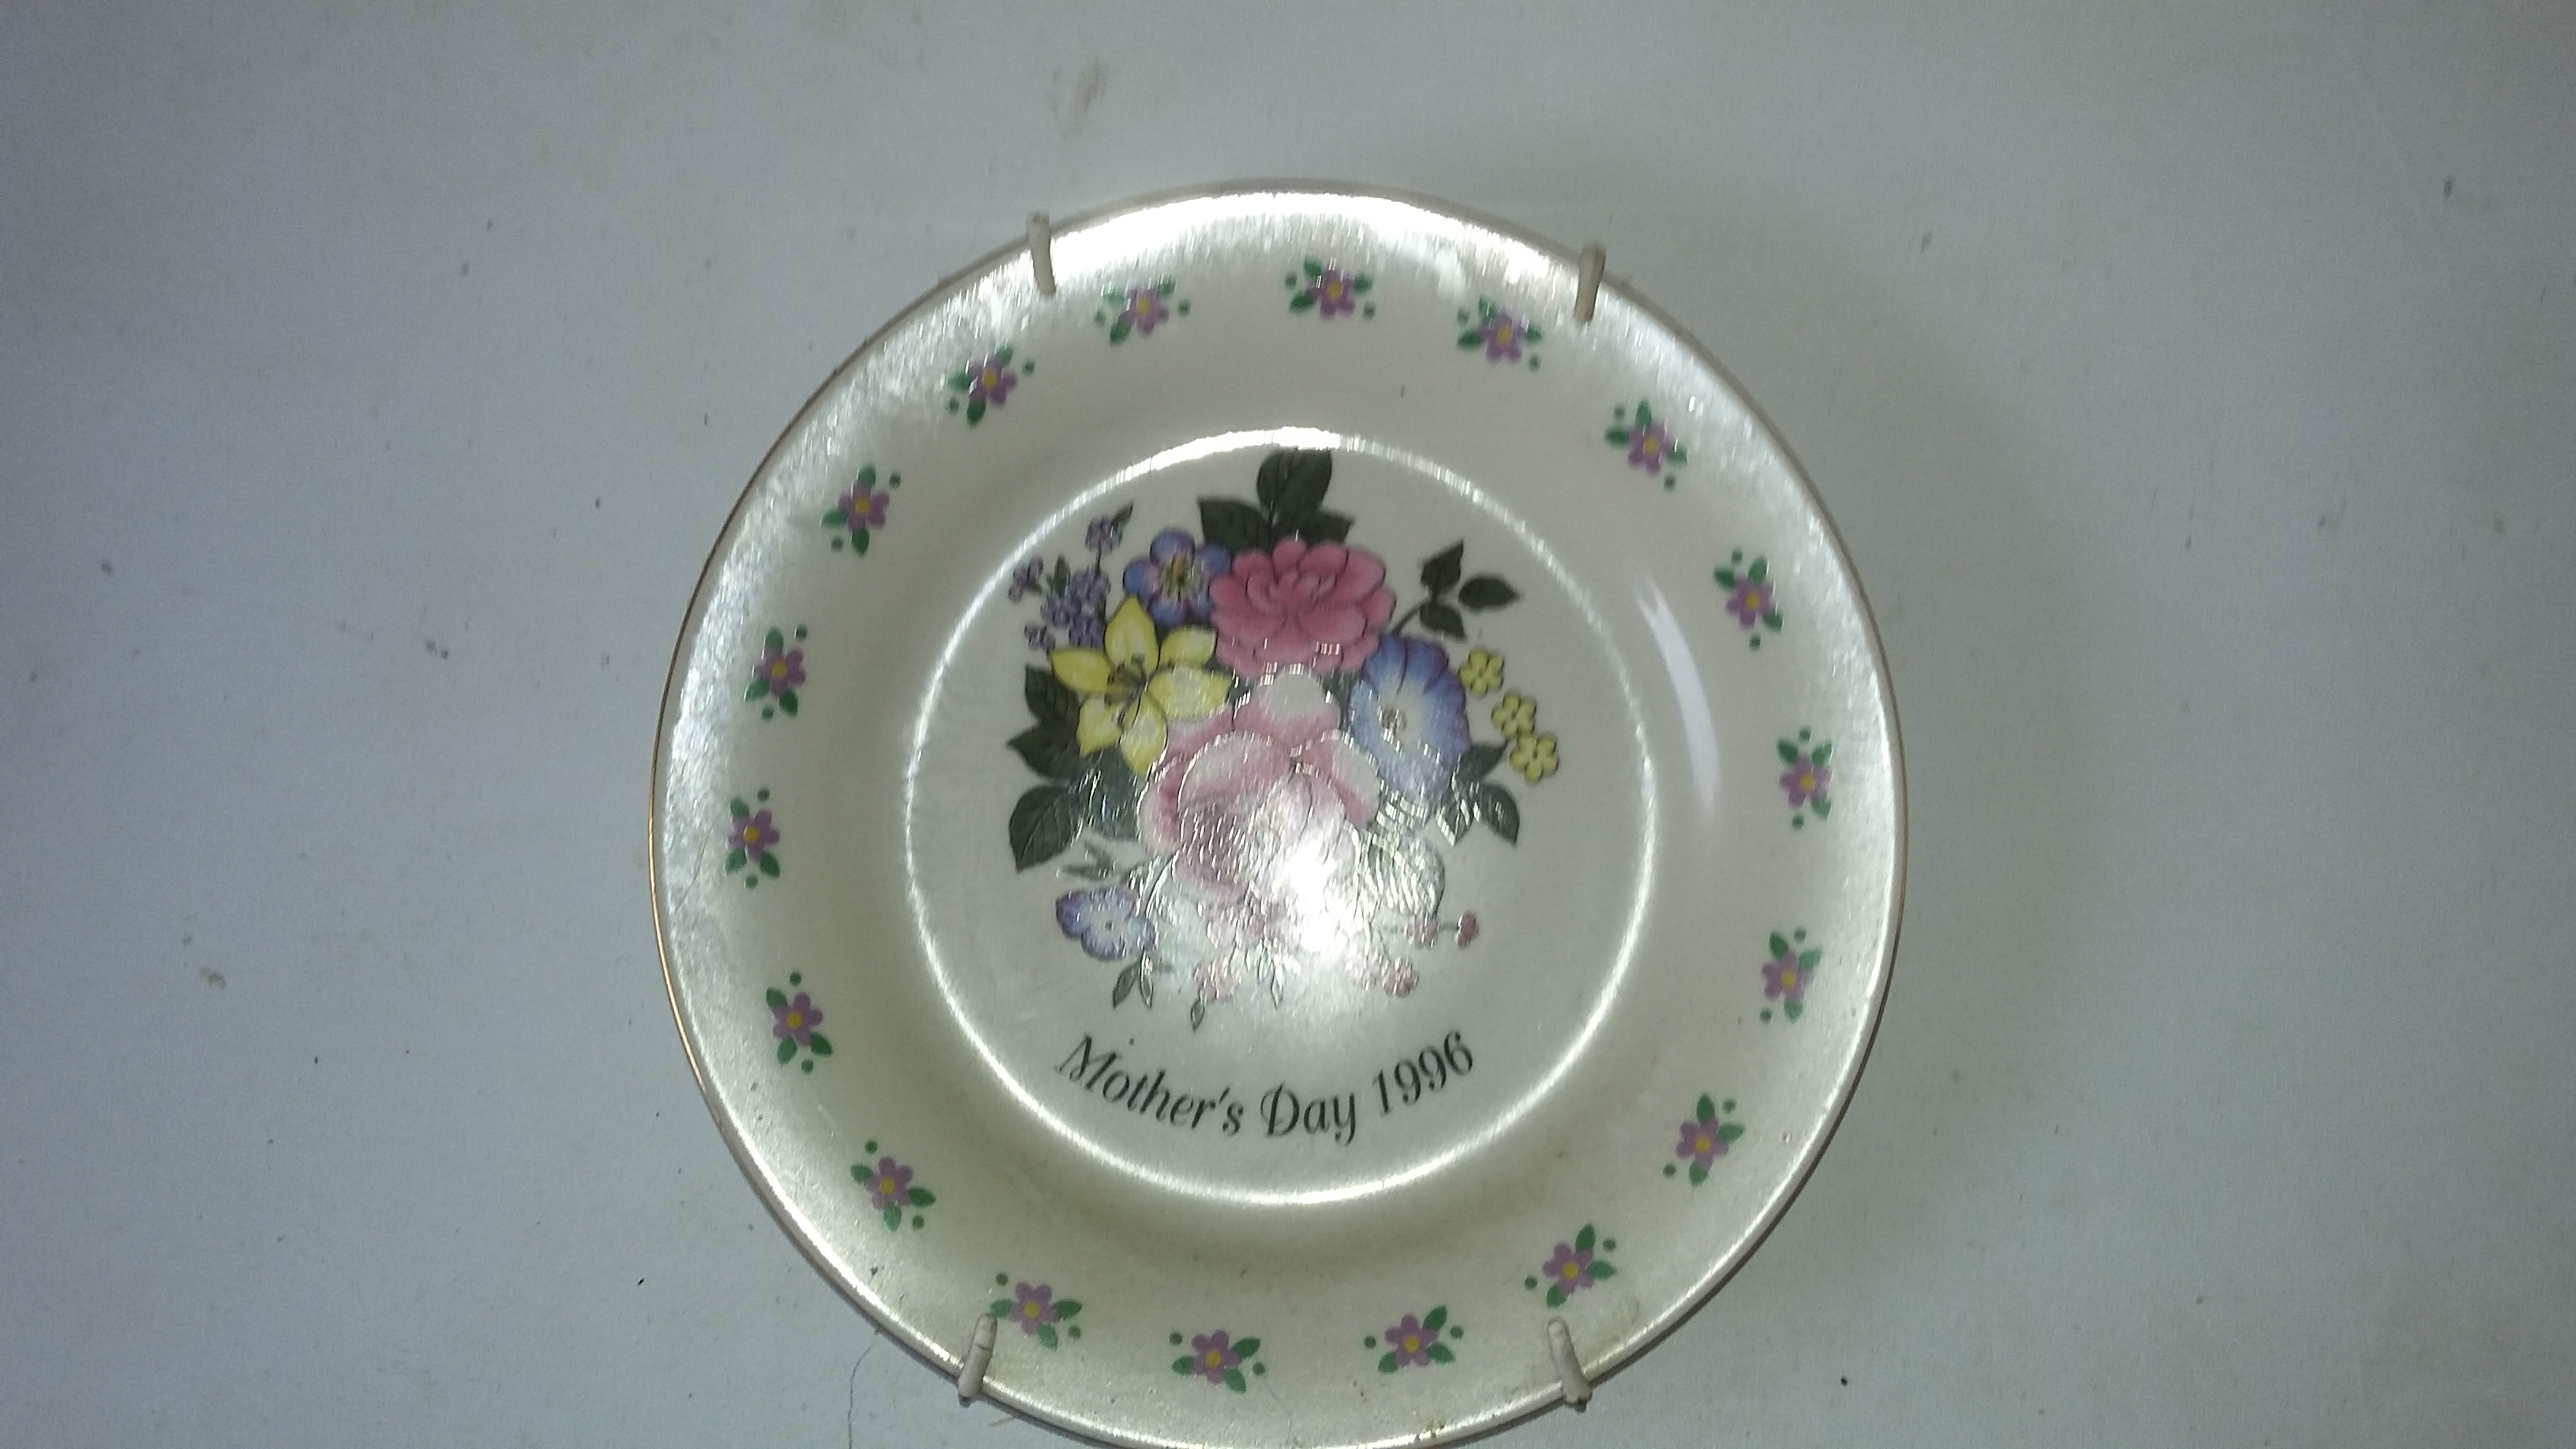 Mothers Day 1996 Decorative Plate